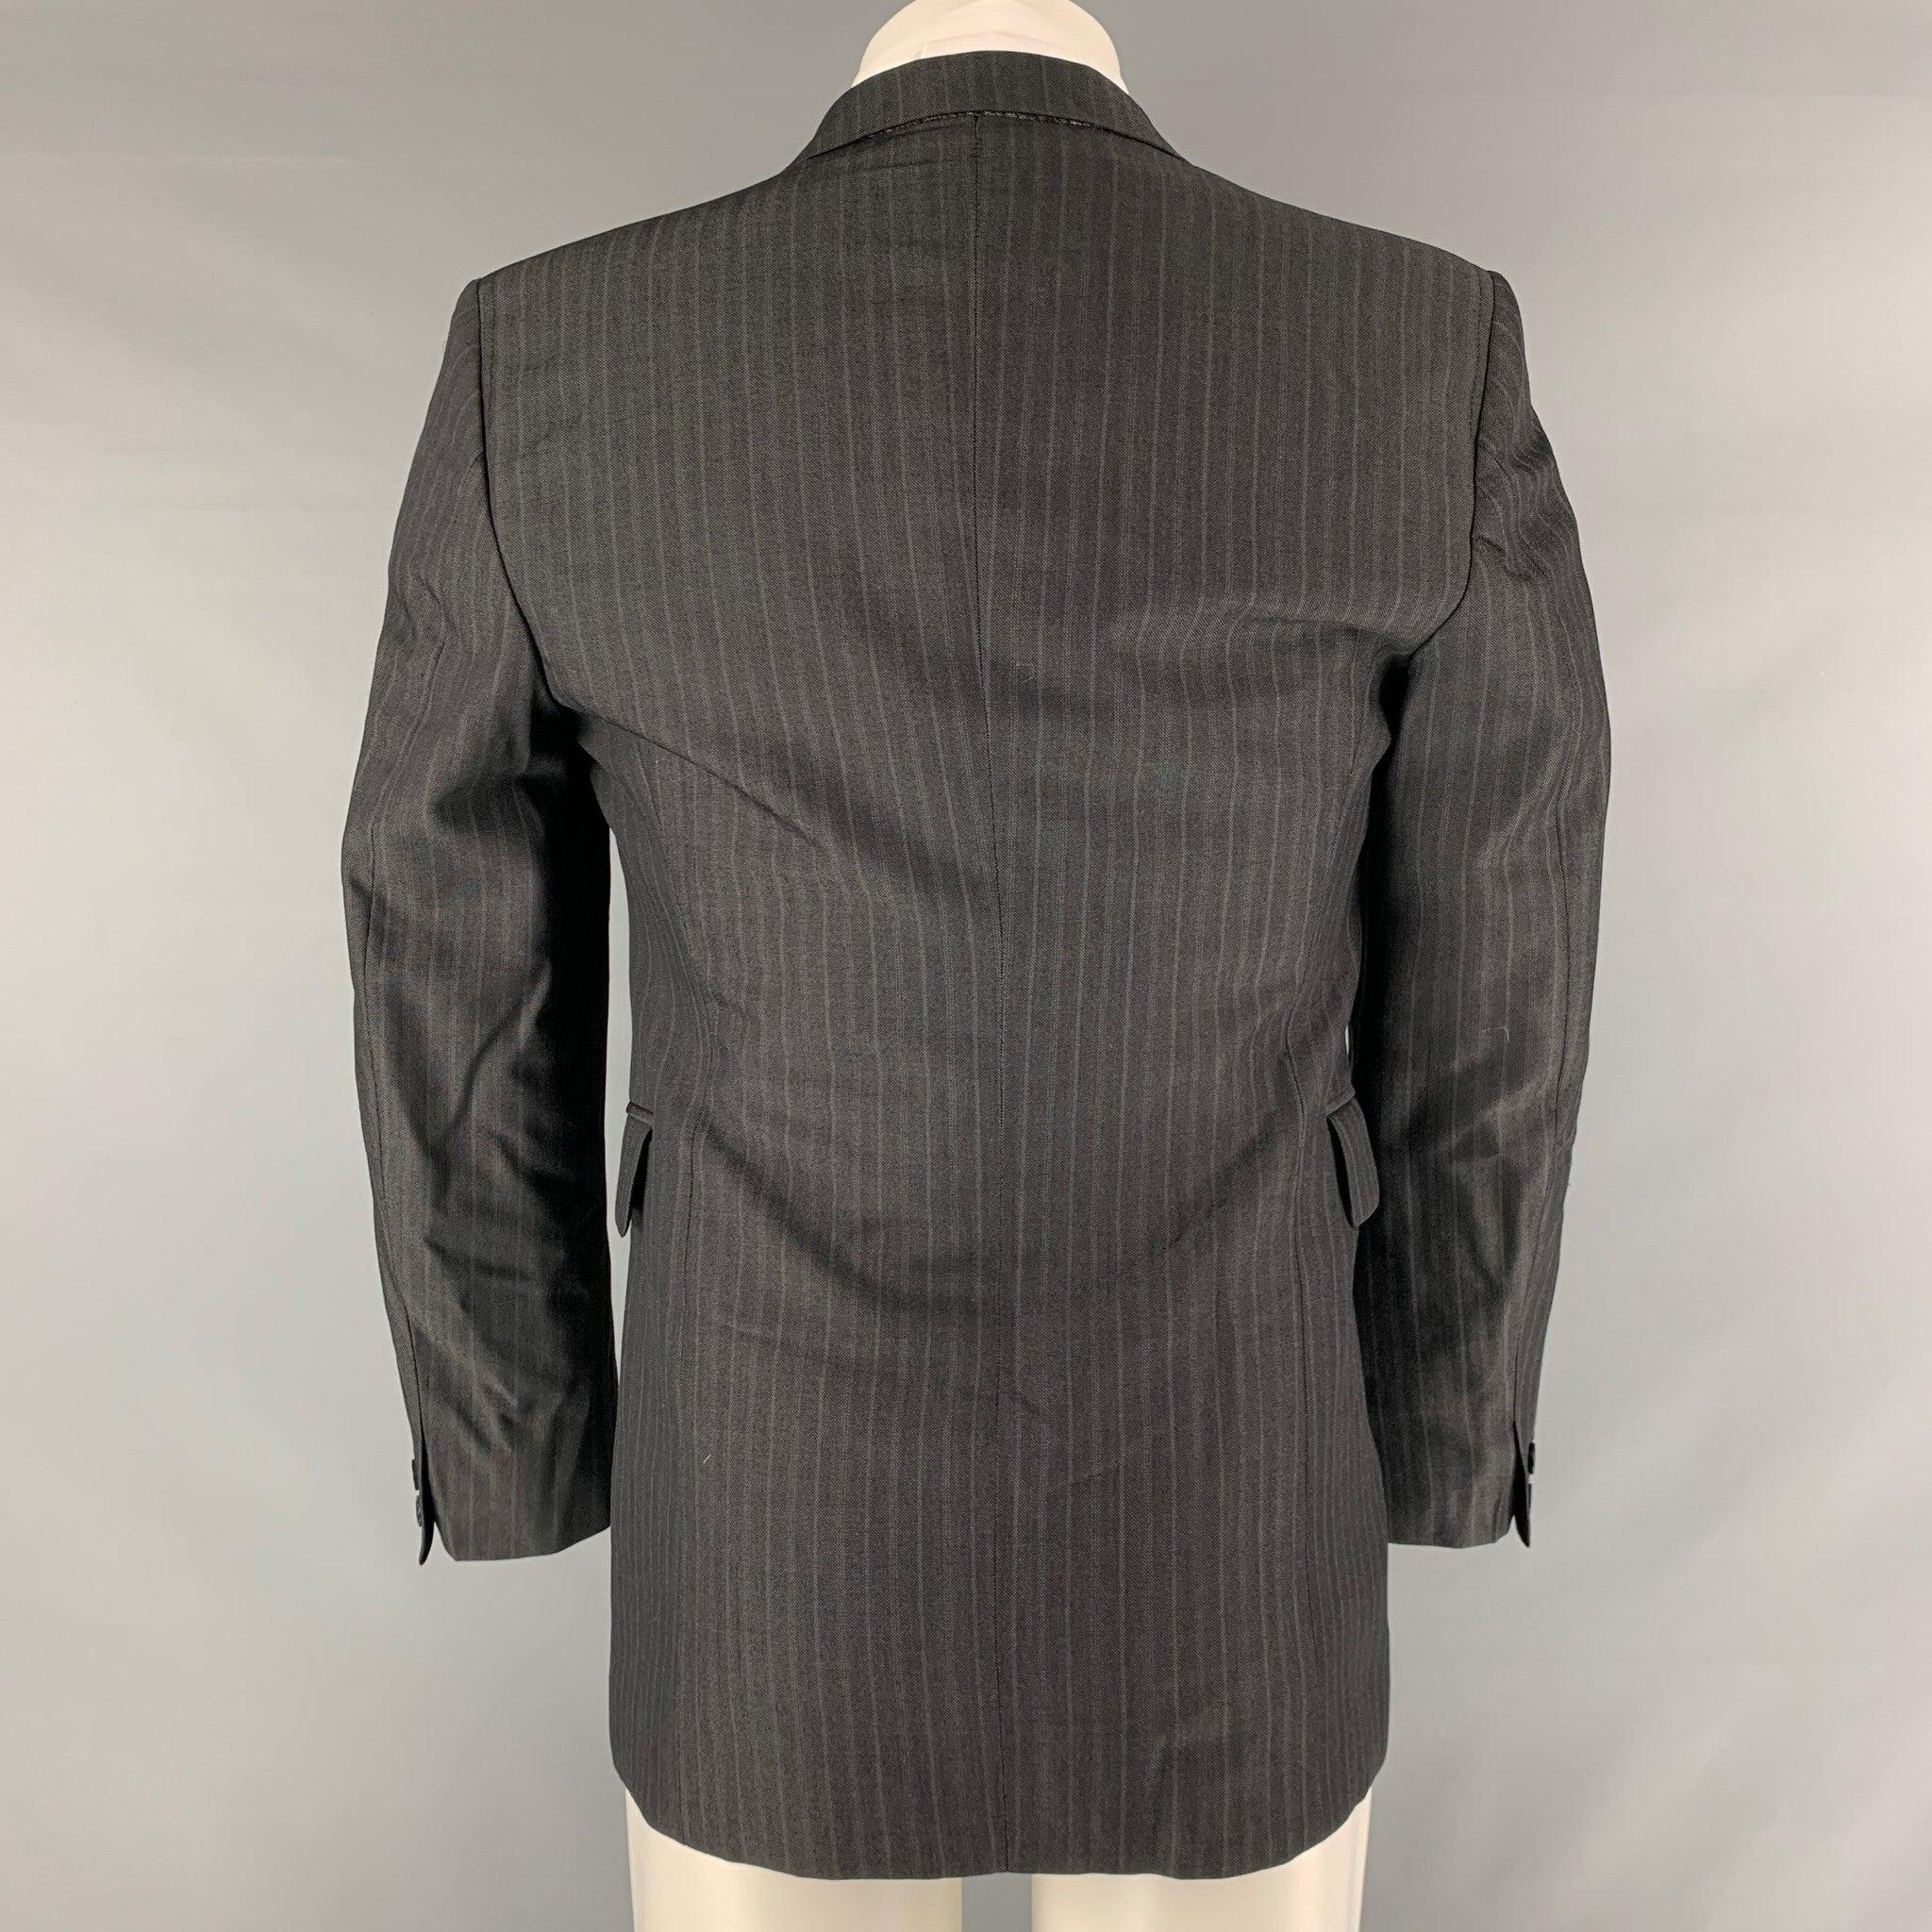 CoSTUME NATIONAL Size 38 Black Stripe Wool Blend Notch Lapel Sport Coat In Good Condition For Sale In San Francisco, CA